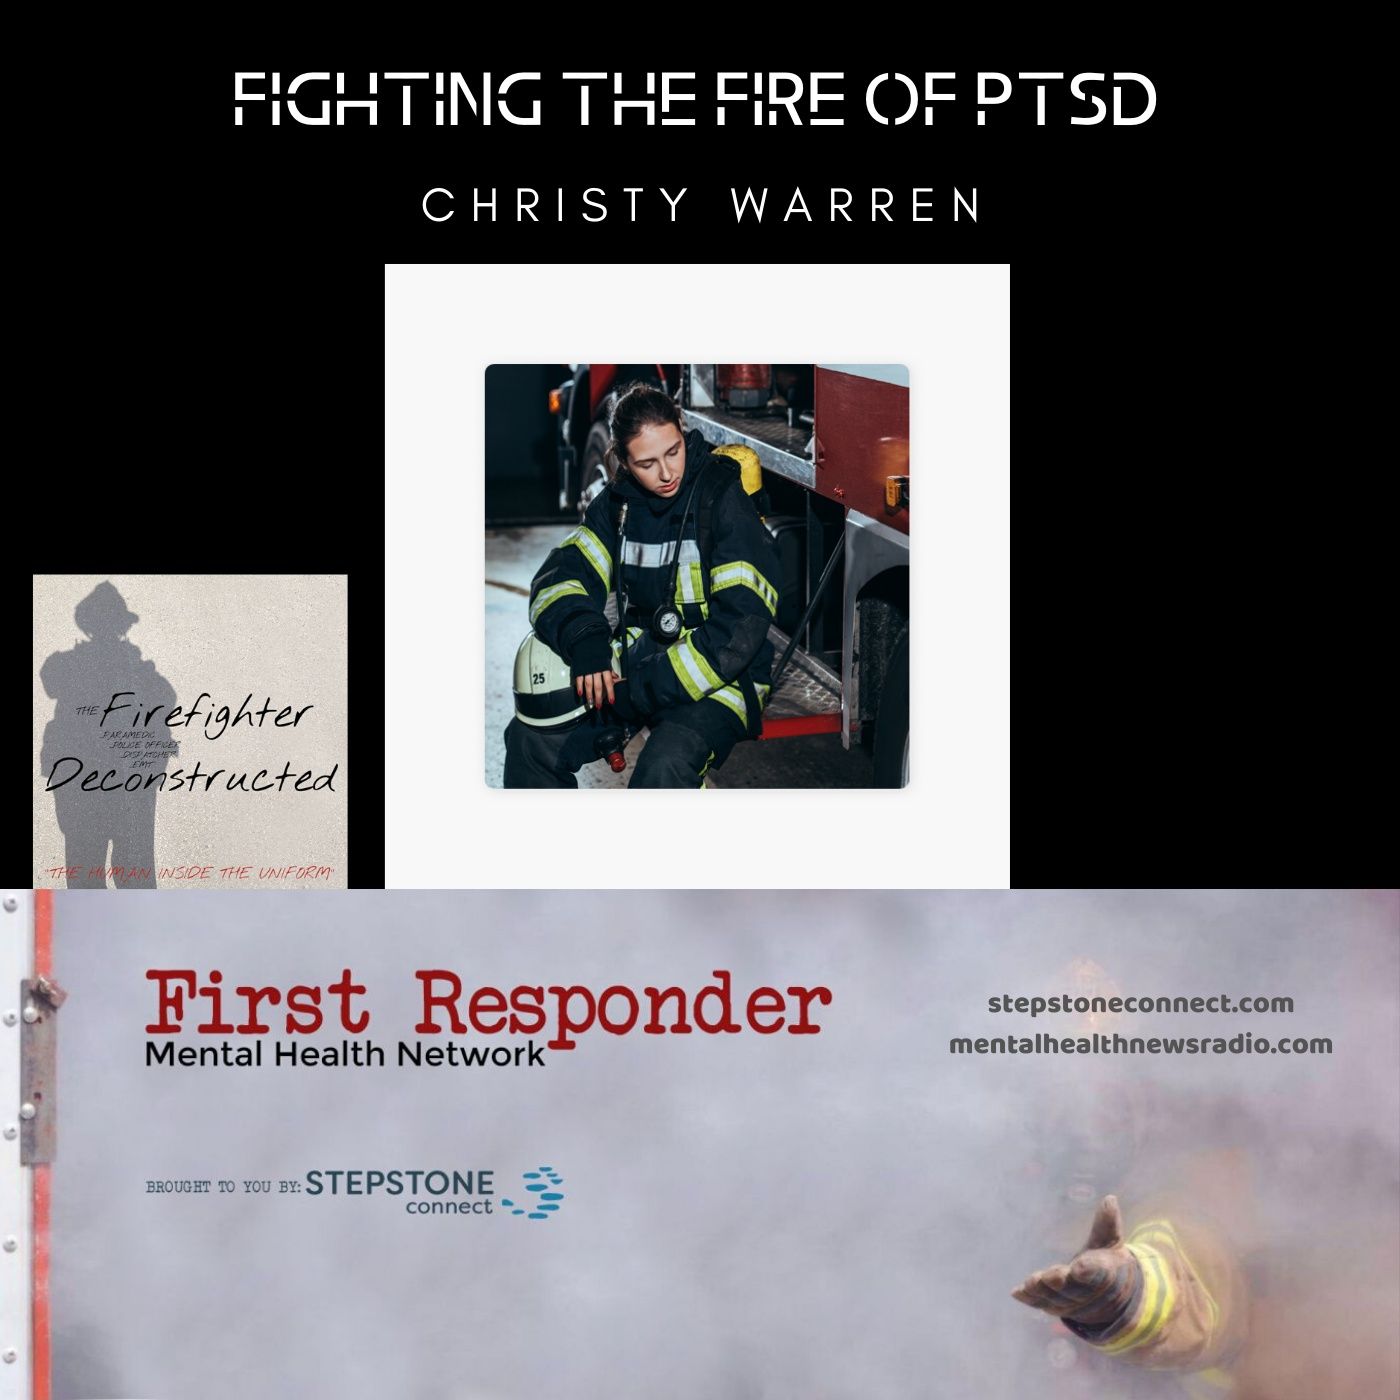 Mental Health News Radio - Fighting the Fire of PTSD with Christy Warren